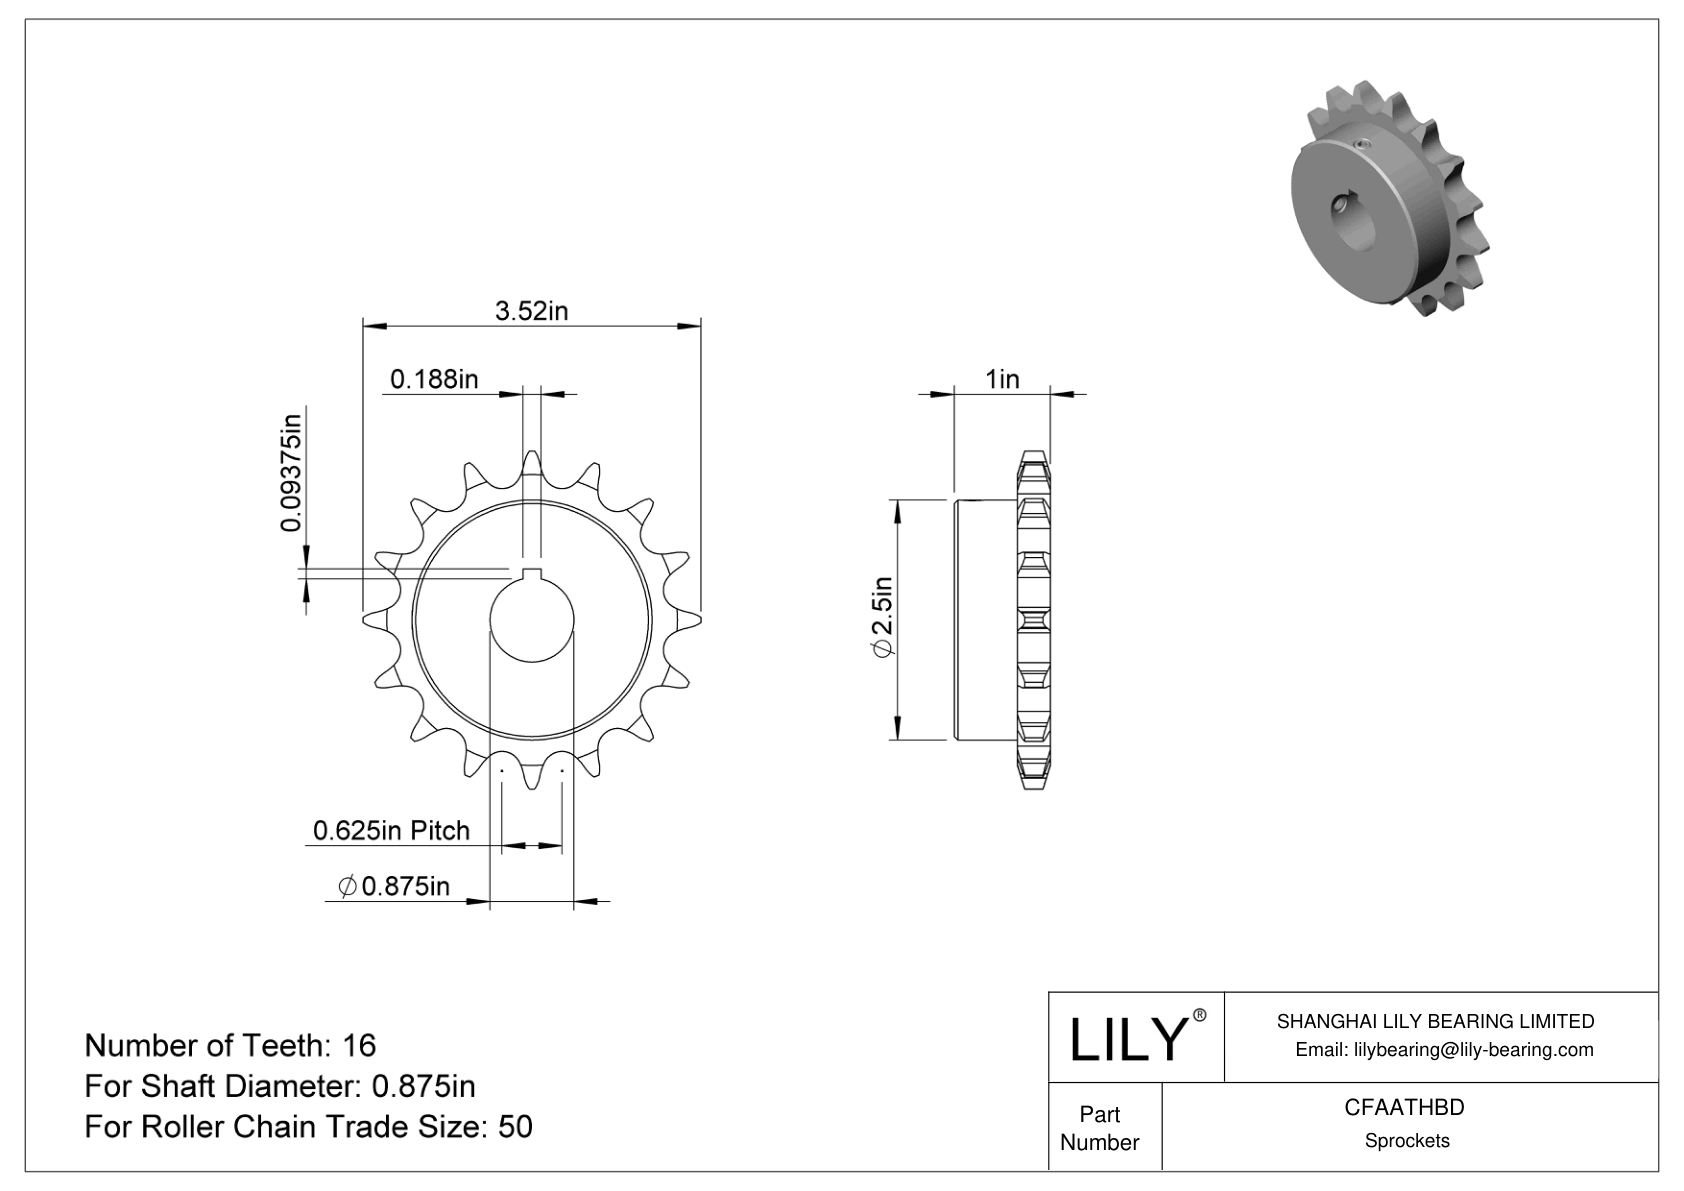 CFAATHBD Wear-Resistant Sprockets for ANSI Roller Chain cad drawing